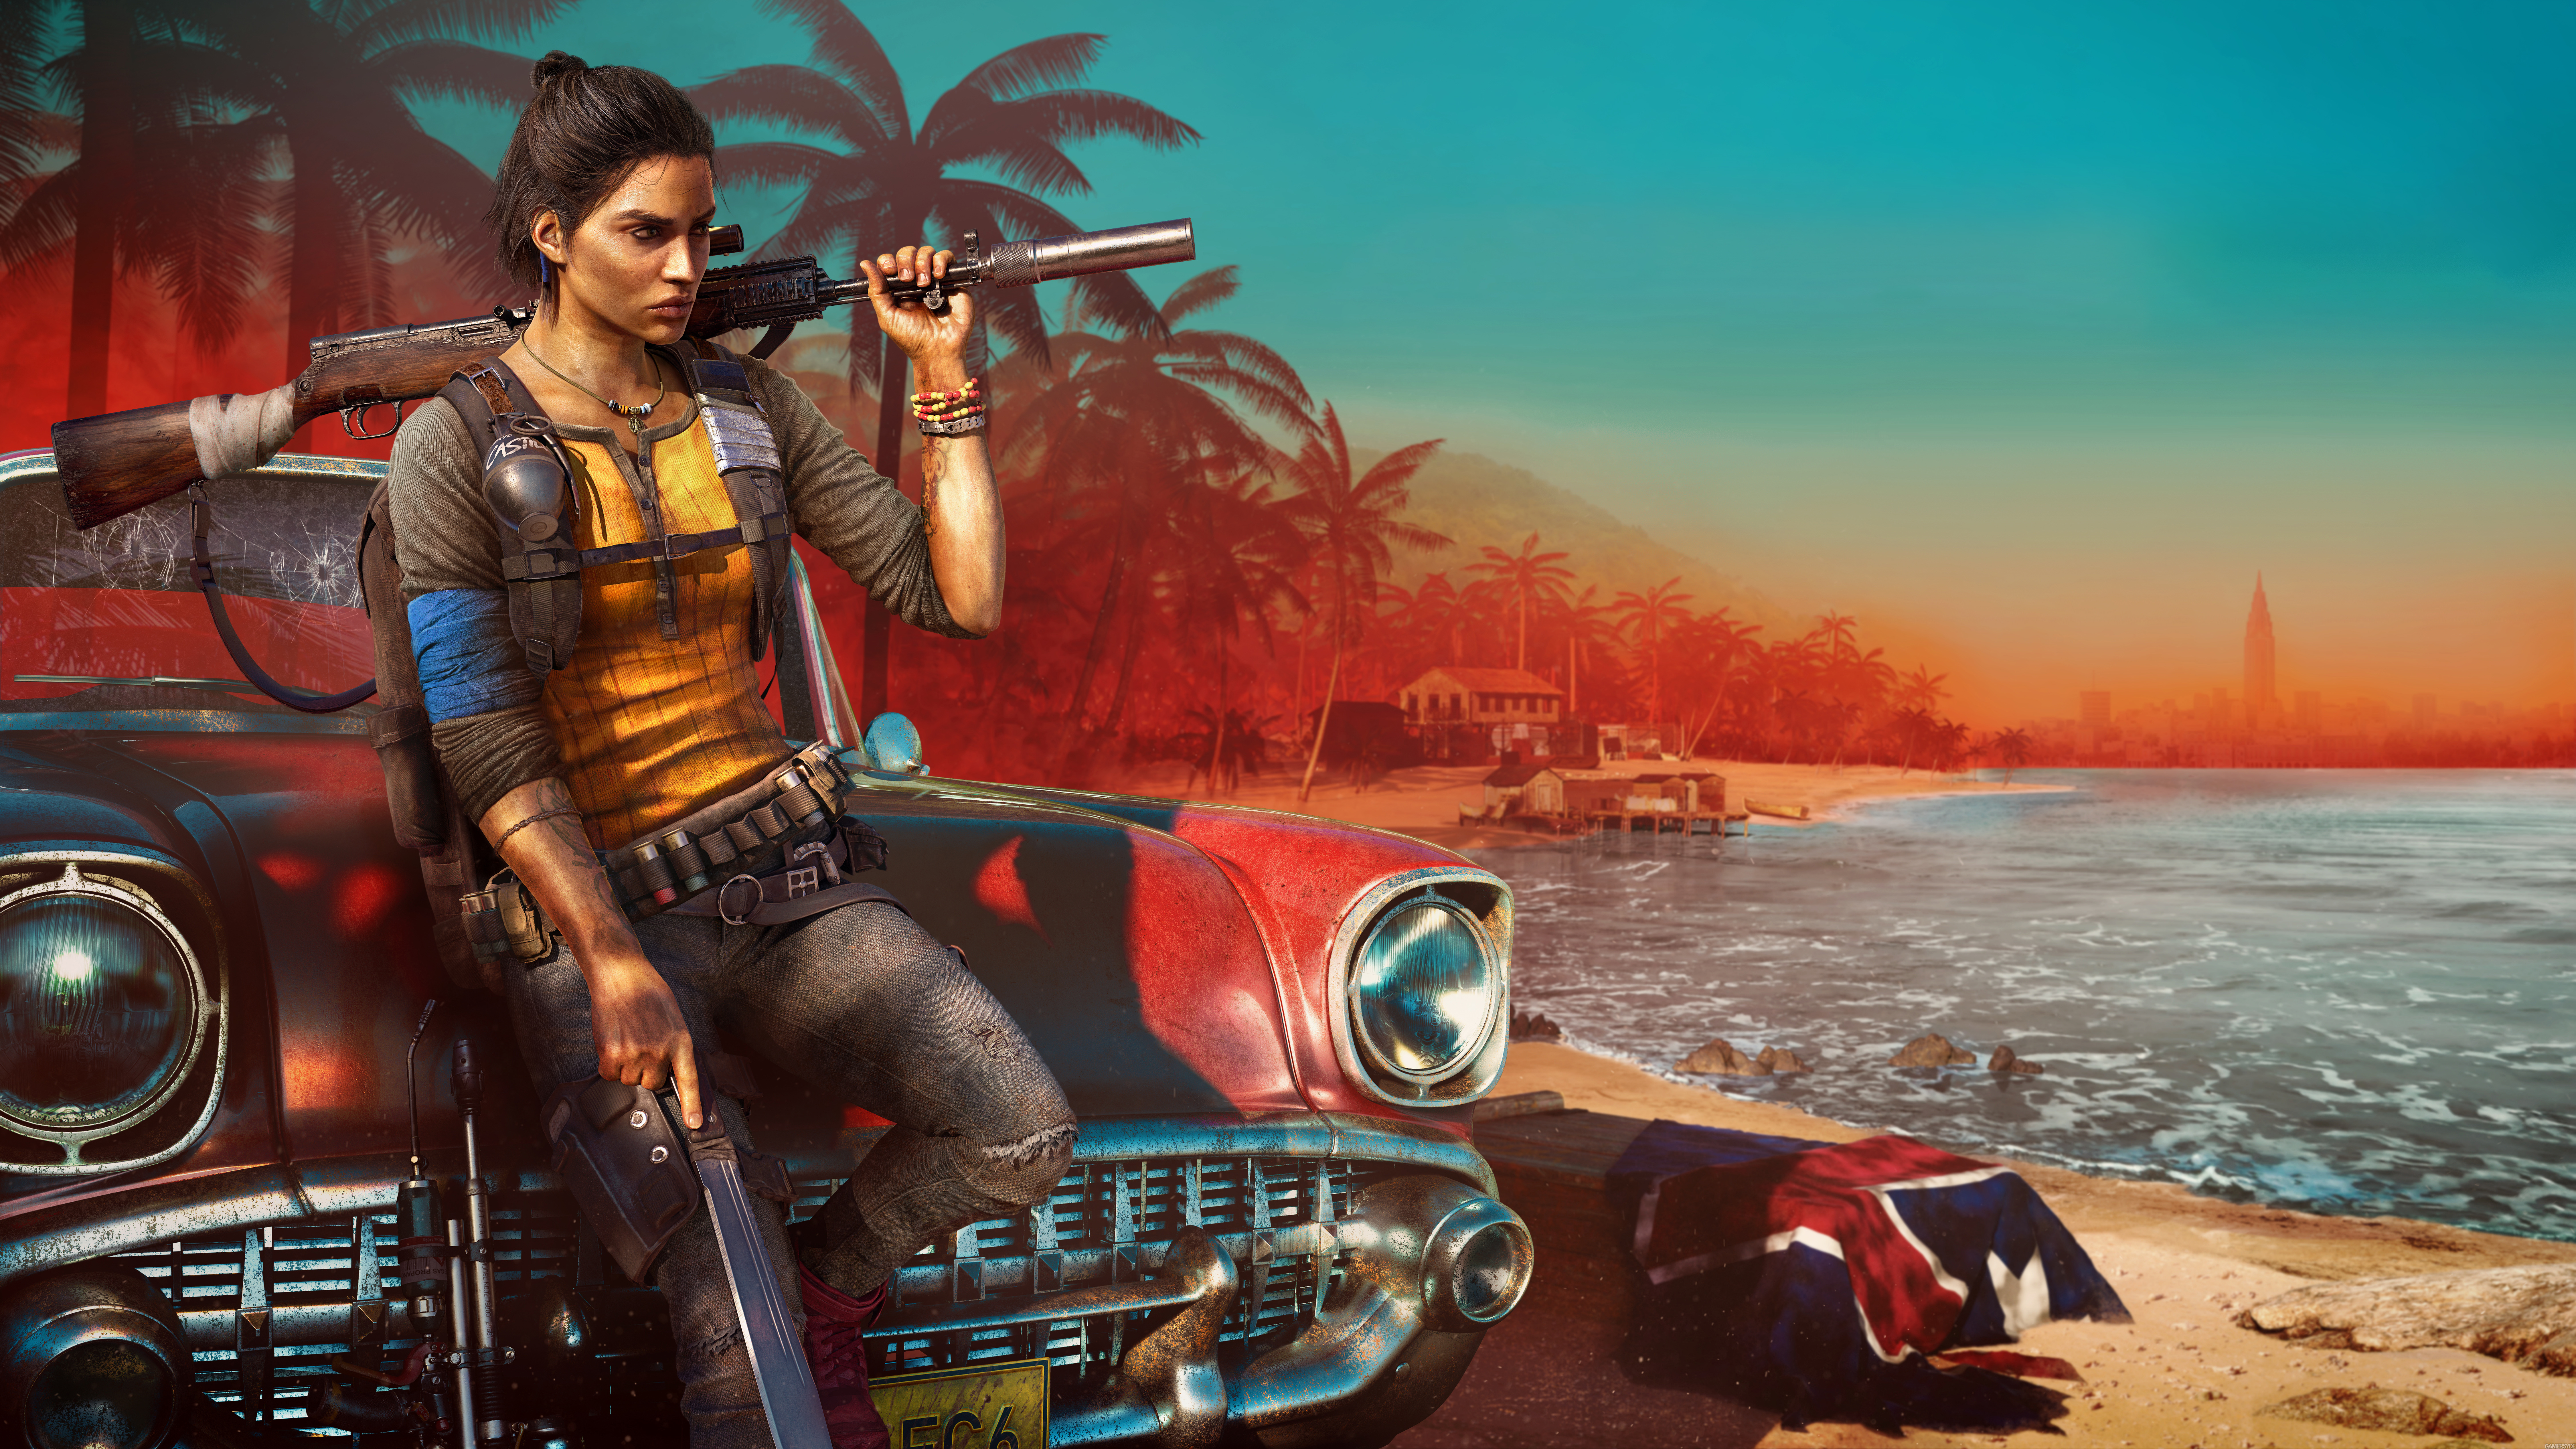 General 9000x5062 Dani Rojas video games video game characters gun video game girls rifles fictional character car women tattoo sleeve looking into the distance video game warriors knife Far Cry Survival Knife Far Cry 6